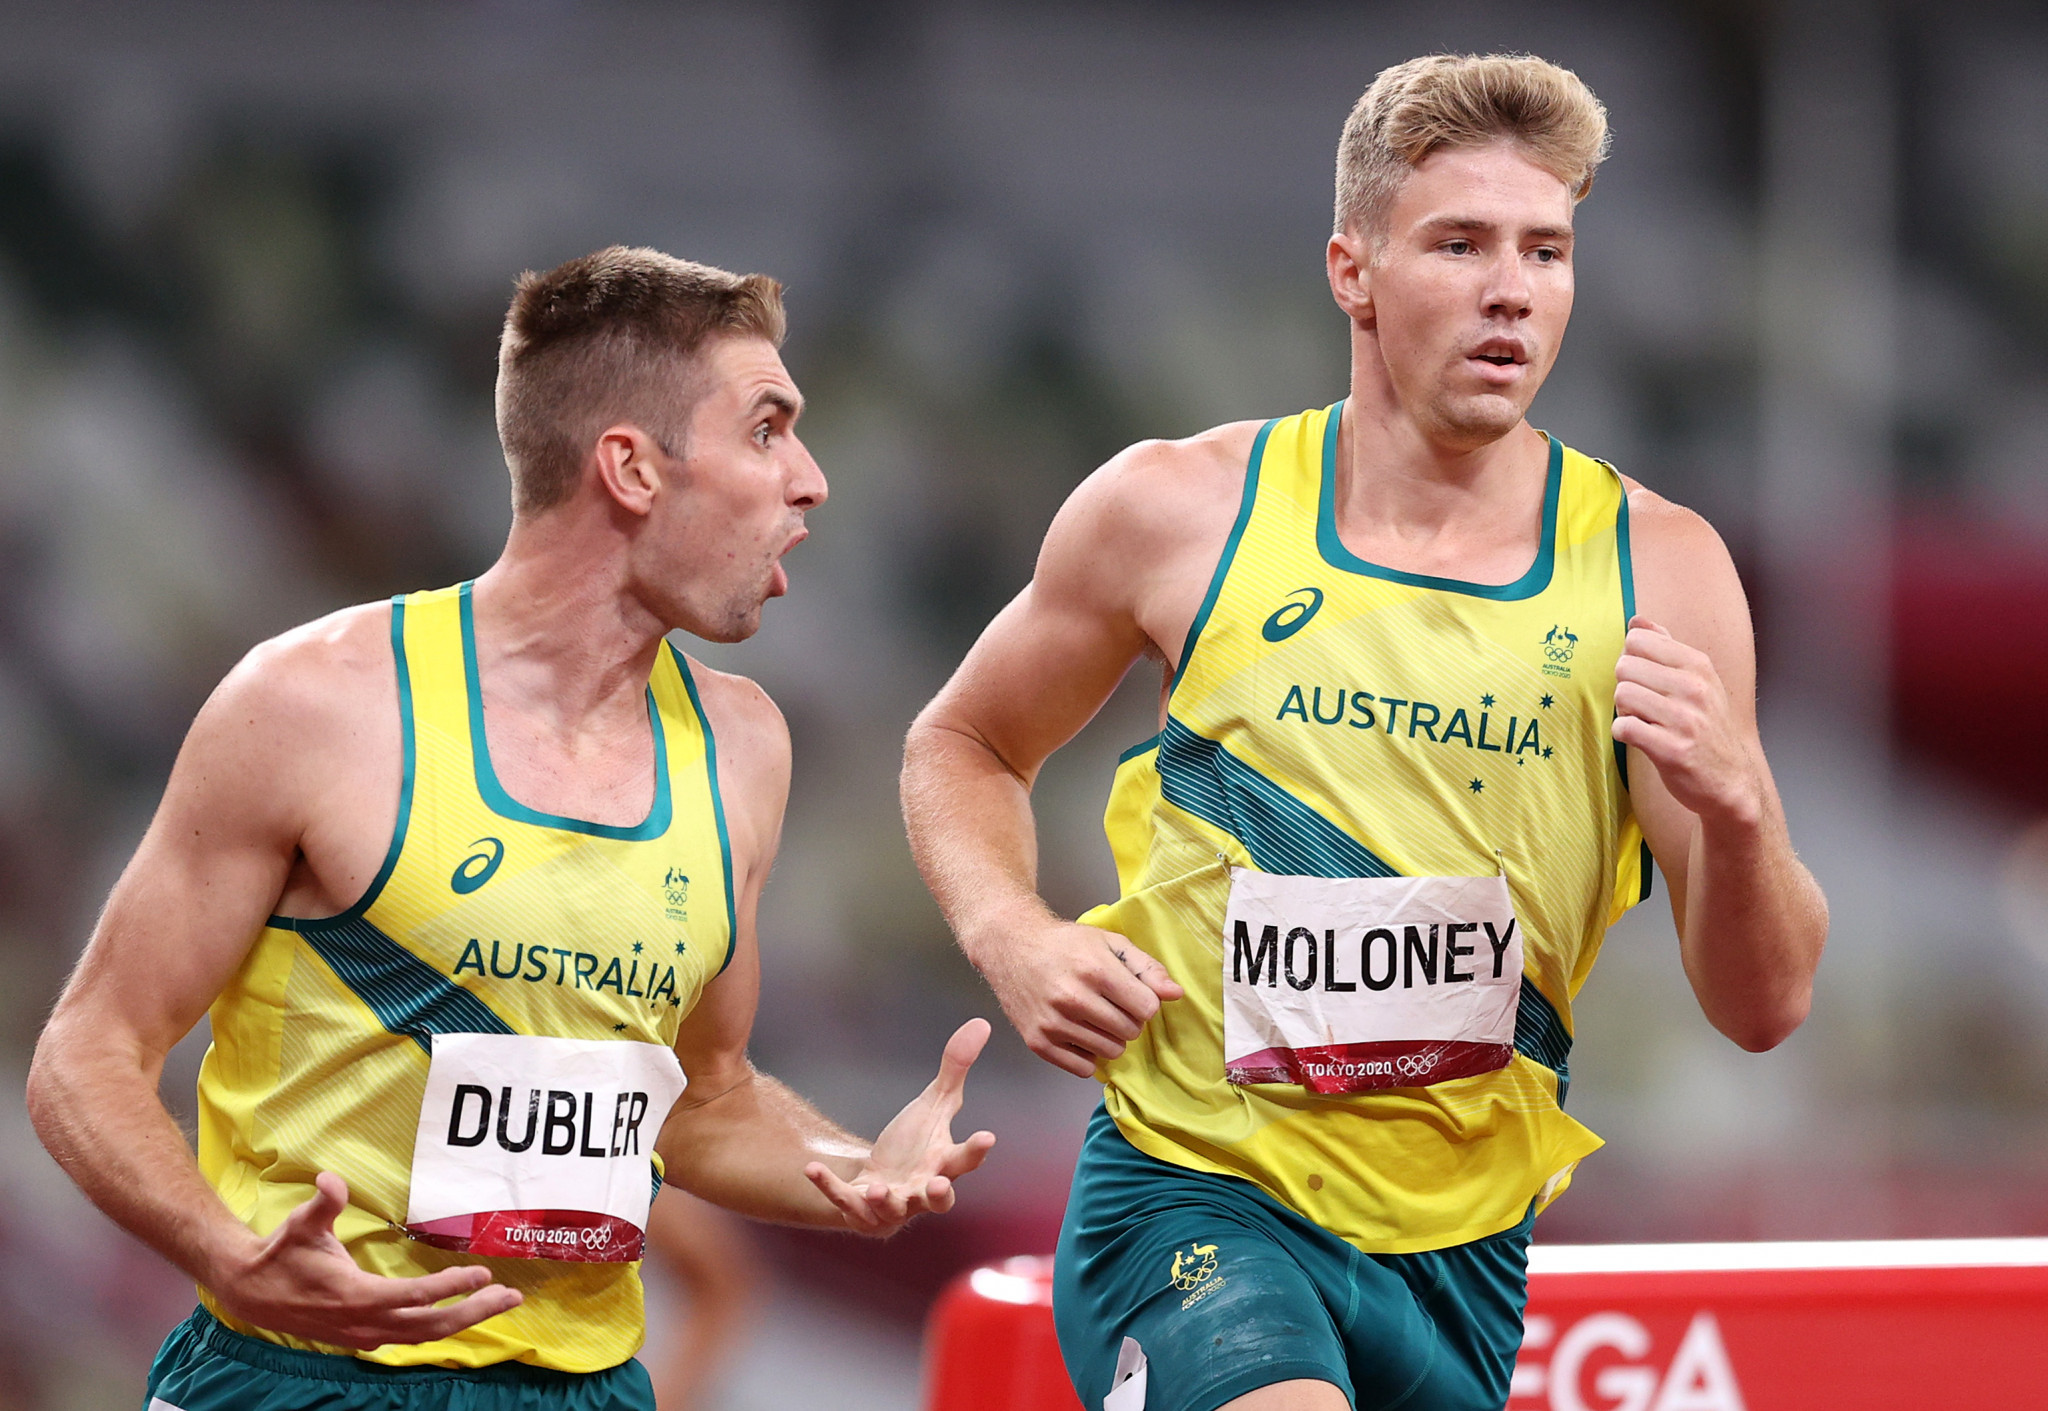 Australian athletes such as Cedric Dubler and Ashley Moloney, will be given honorary medals for a top three Asian Games finish ©Getty Images